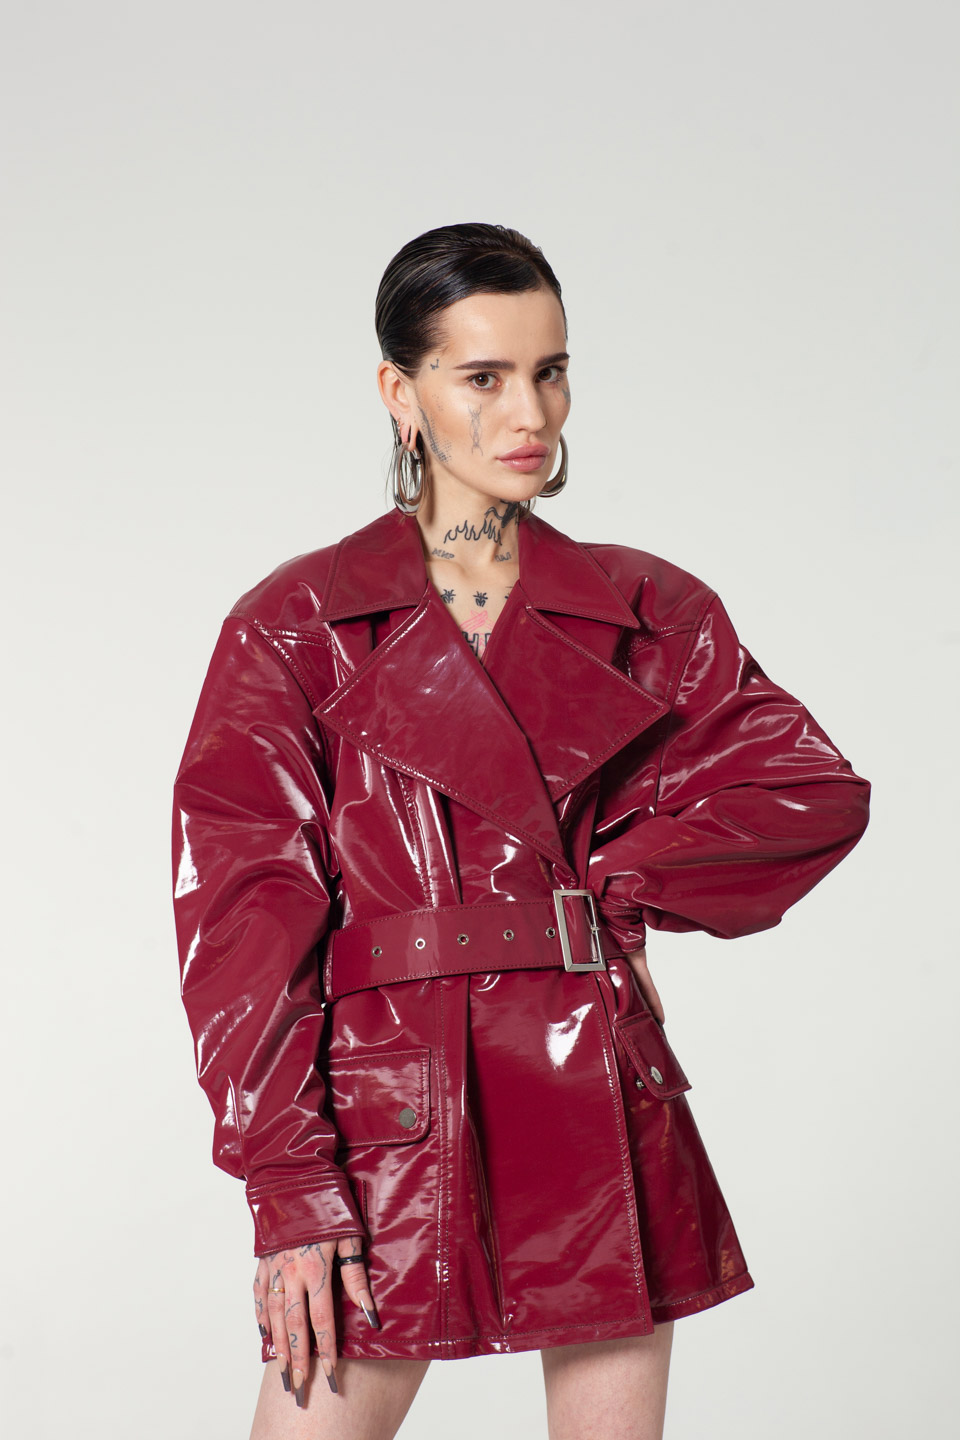 Trench coat in burgundy red 